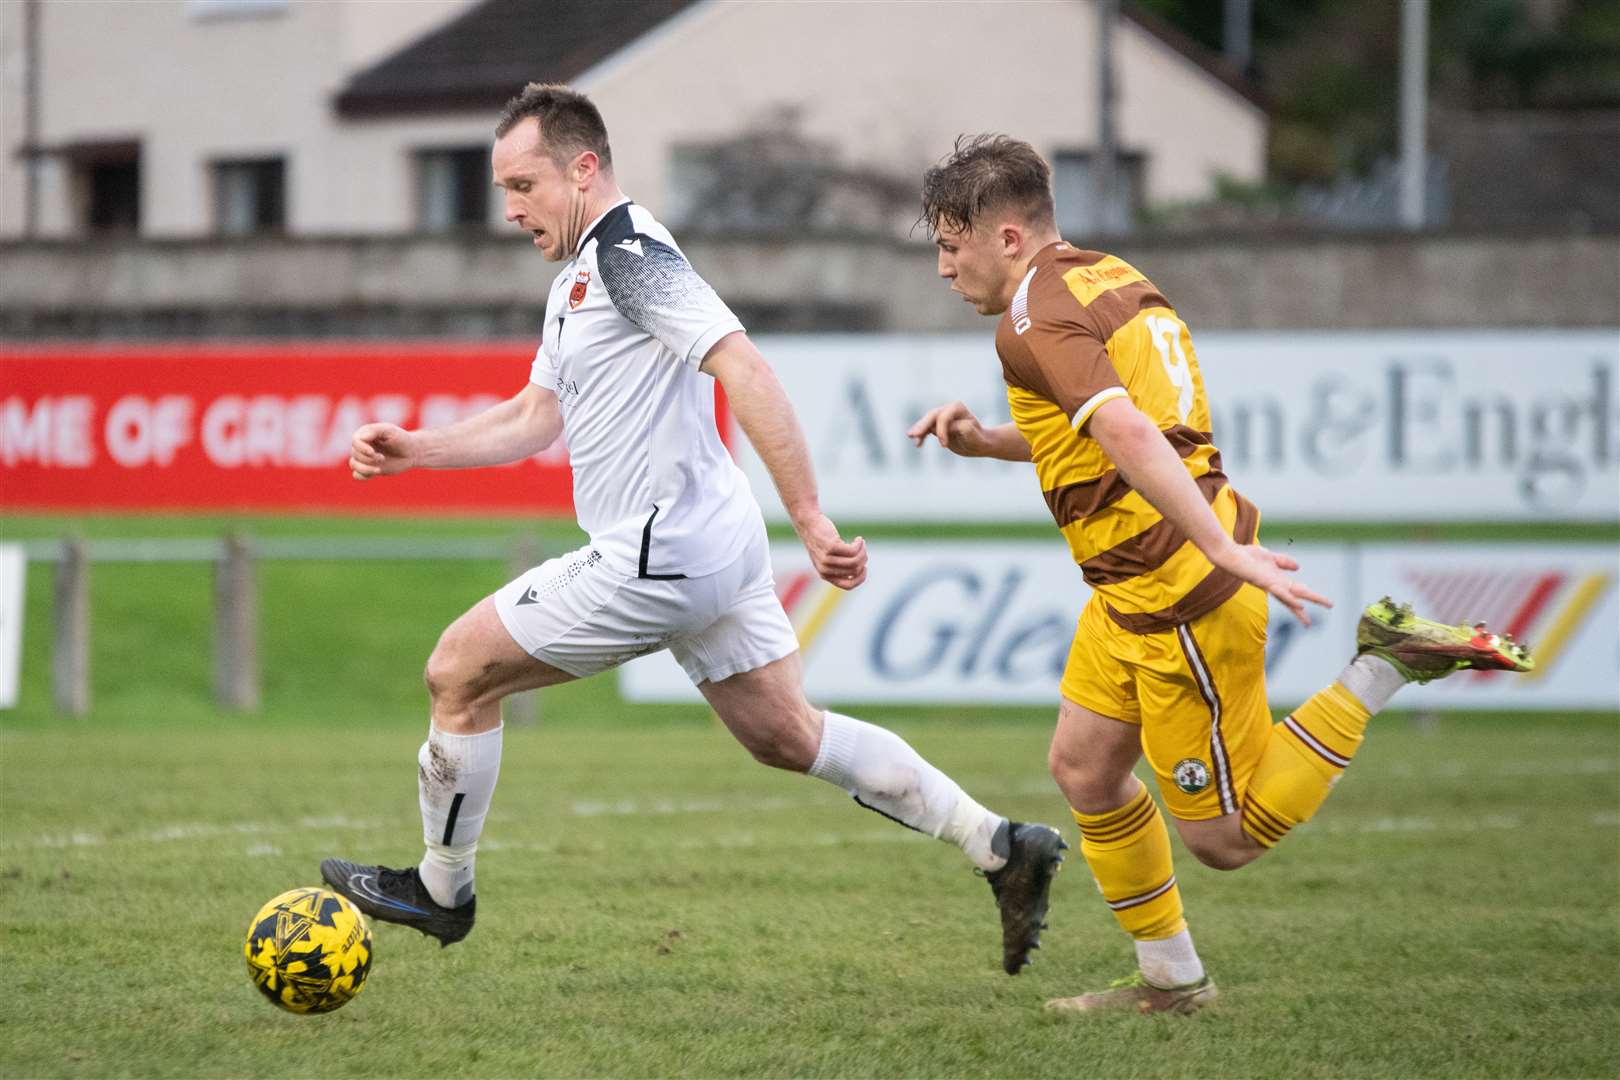 Rothes centre back Charlie MacDonald looks to play the ball away from Forres forward Shaun Morrison. ..Forres Mechanics FC (0) vs Rothes FC (1) - Highland Football League 23/24 - Mosset Park, Forres 25/11/2023...Picture: Daniel Forsyth..